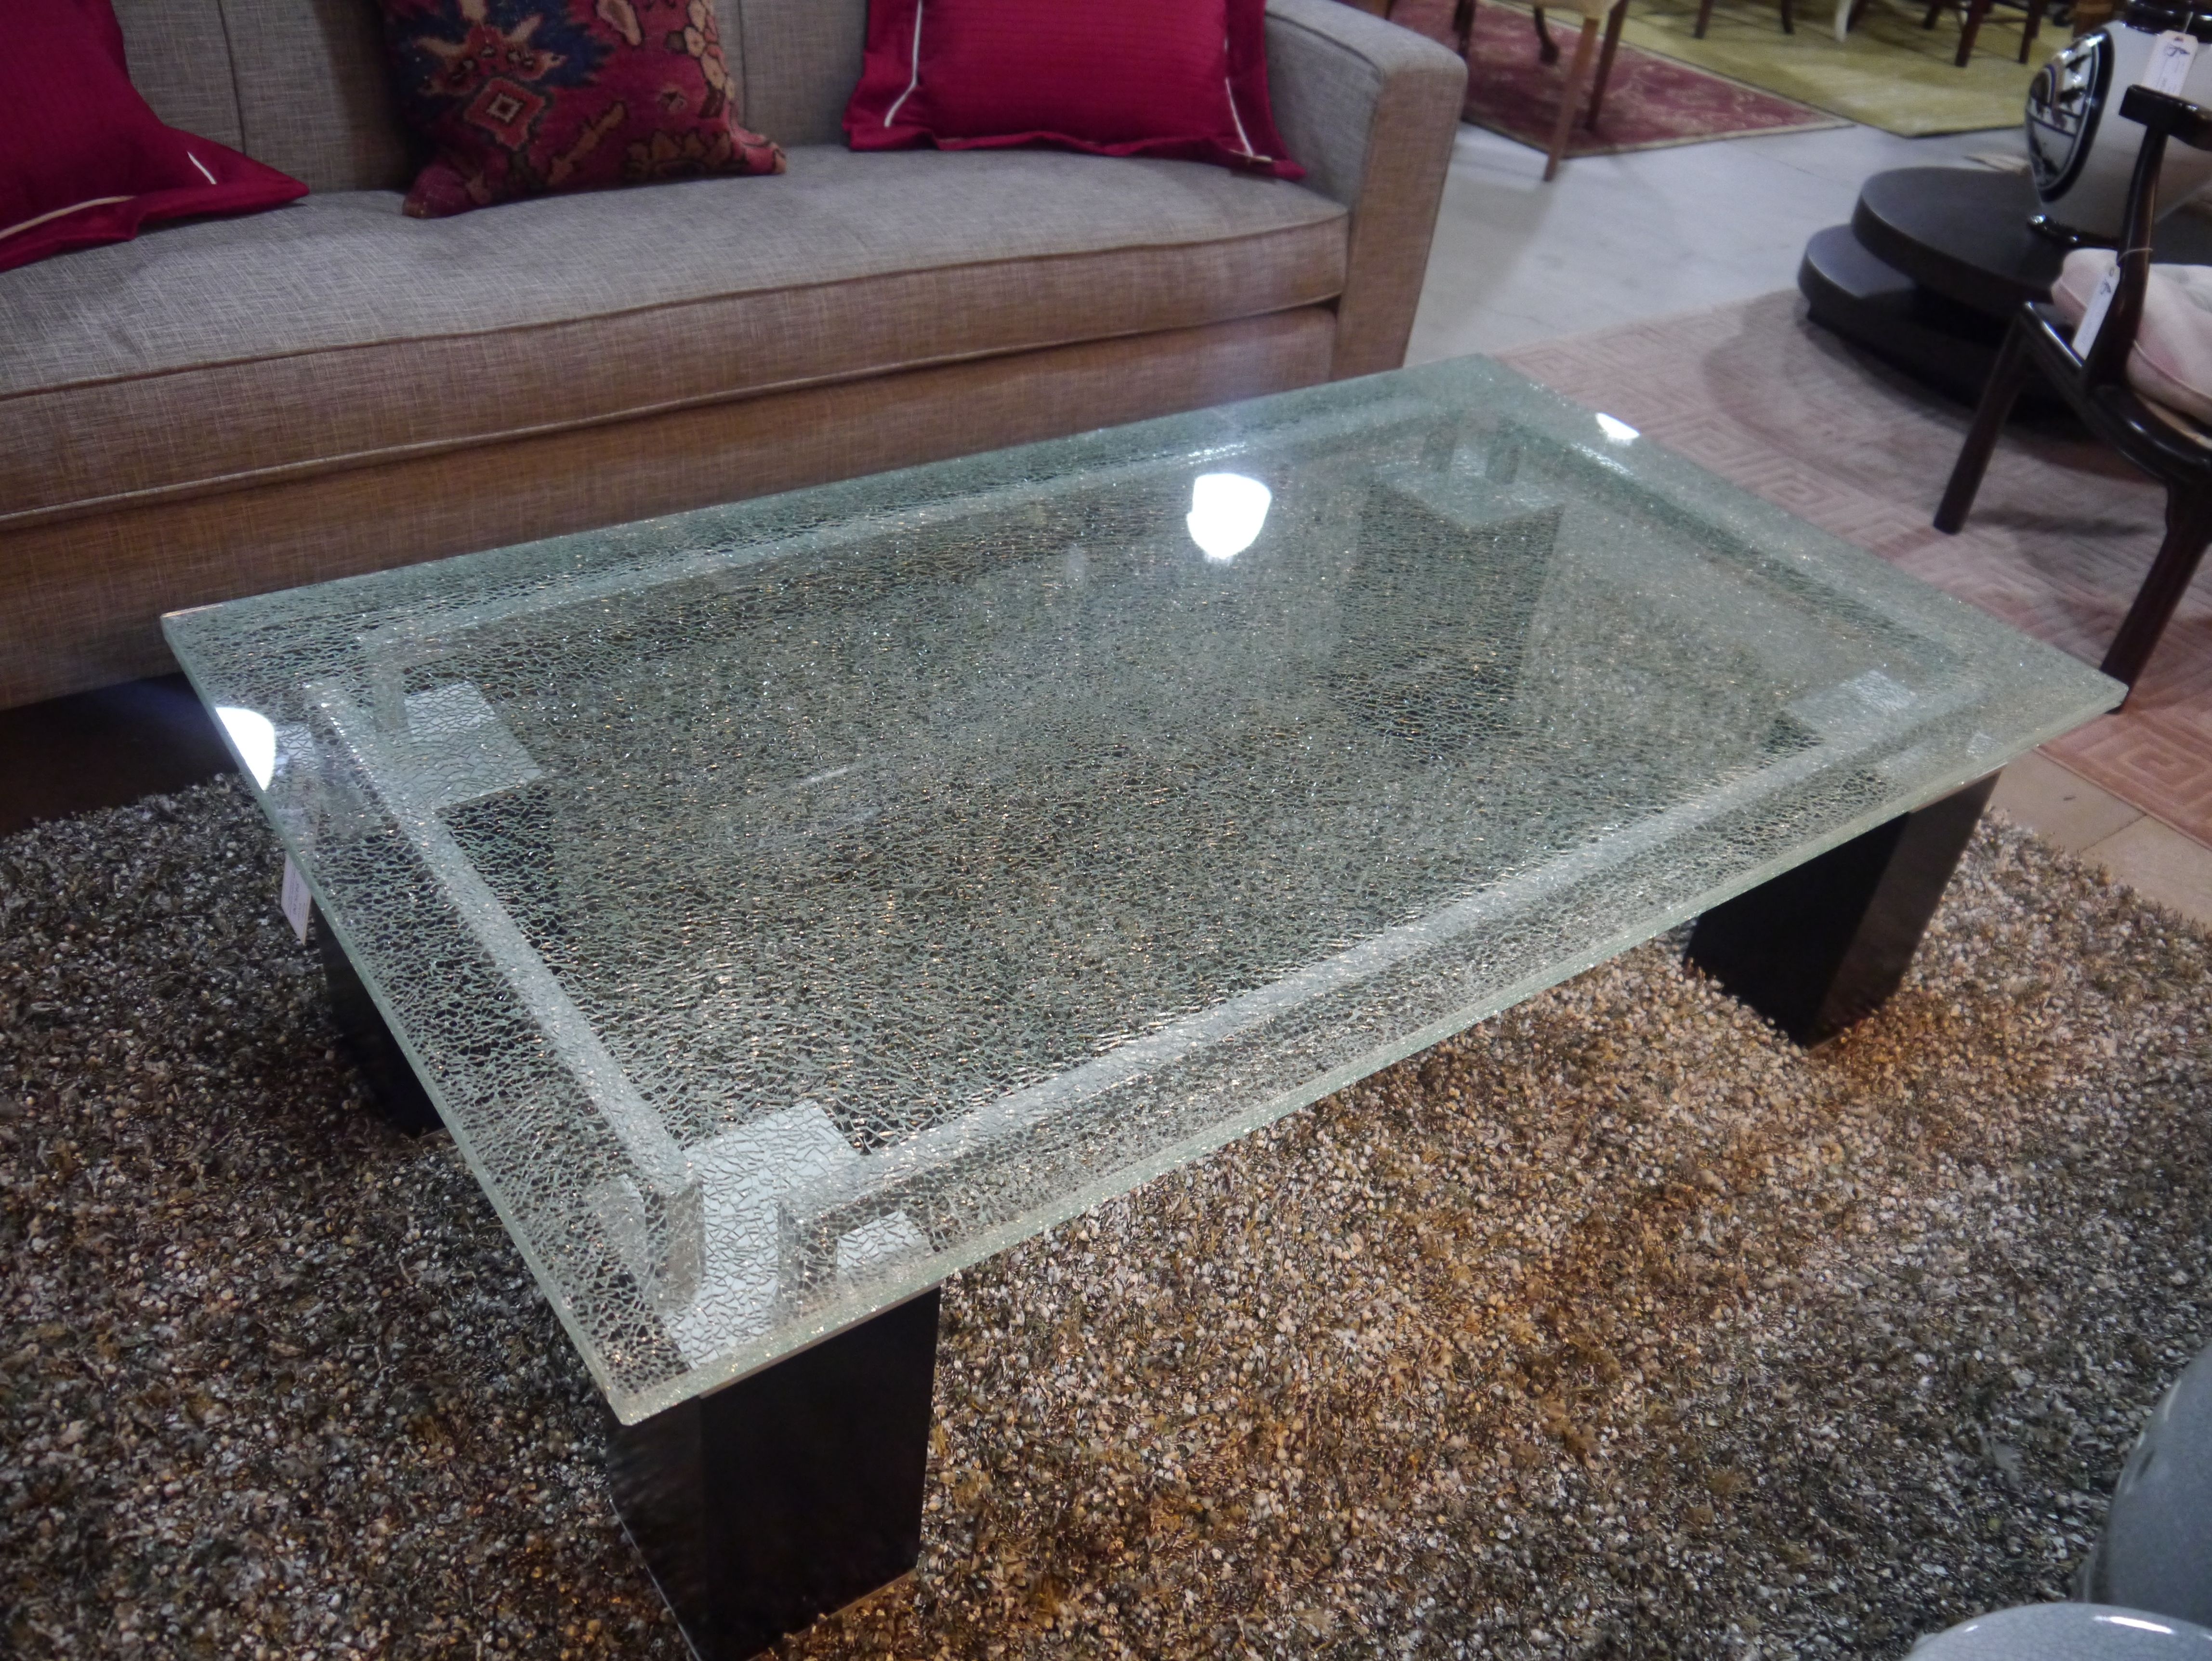 Shattered Glass Coffee Table Awesome Design Ideas Of Coffee Table With Rectangle Shape Glass Top And Also Combine With Fur Rugs And White Ceramics Floor (View 1 of 10)